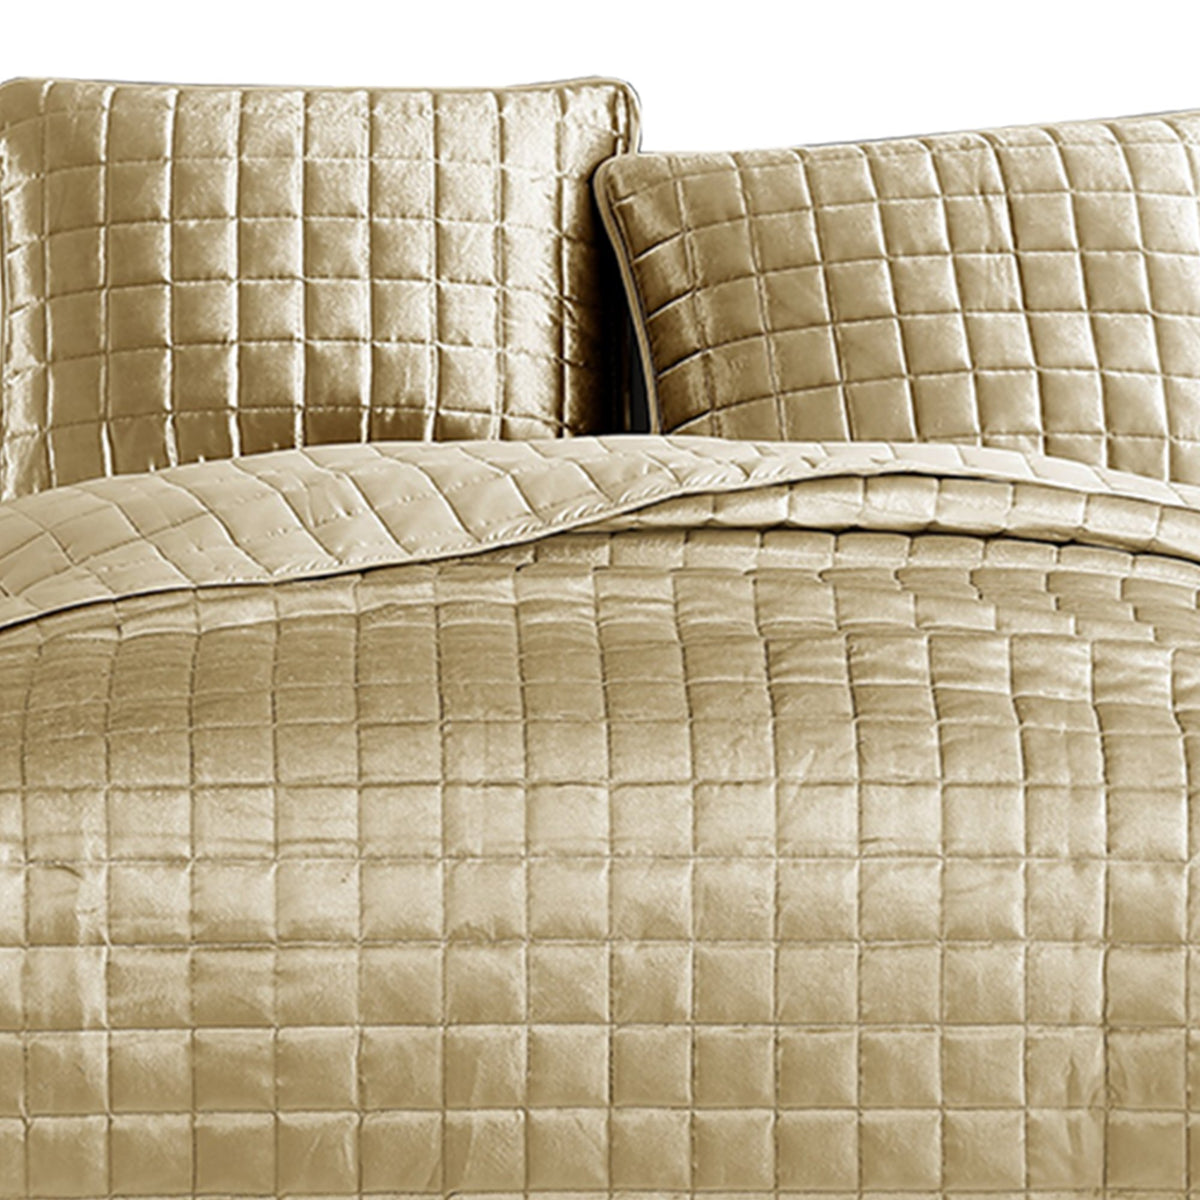 3 Piece King Size Coverlet Set with Stitched Square Pattern, Gold - BM225235